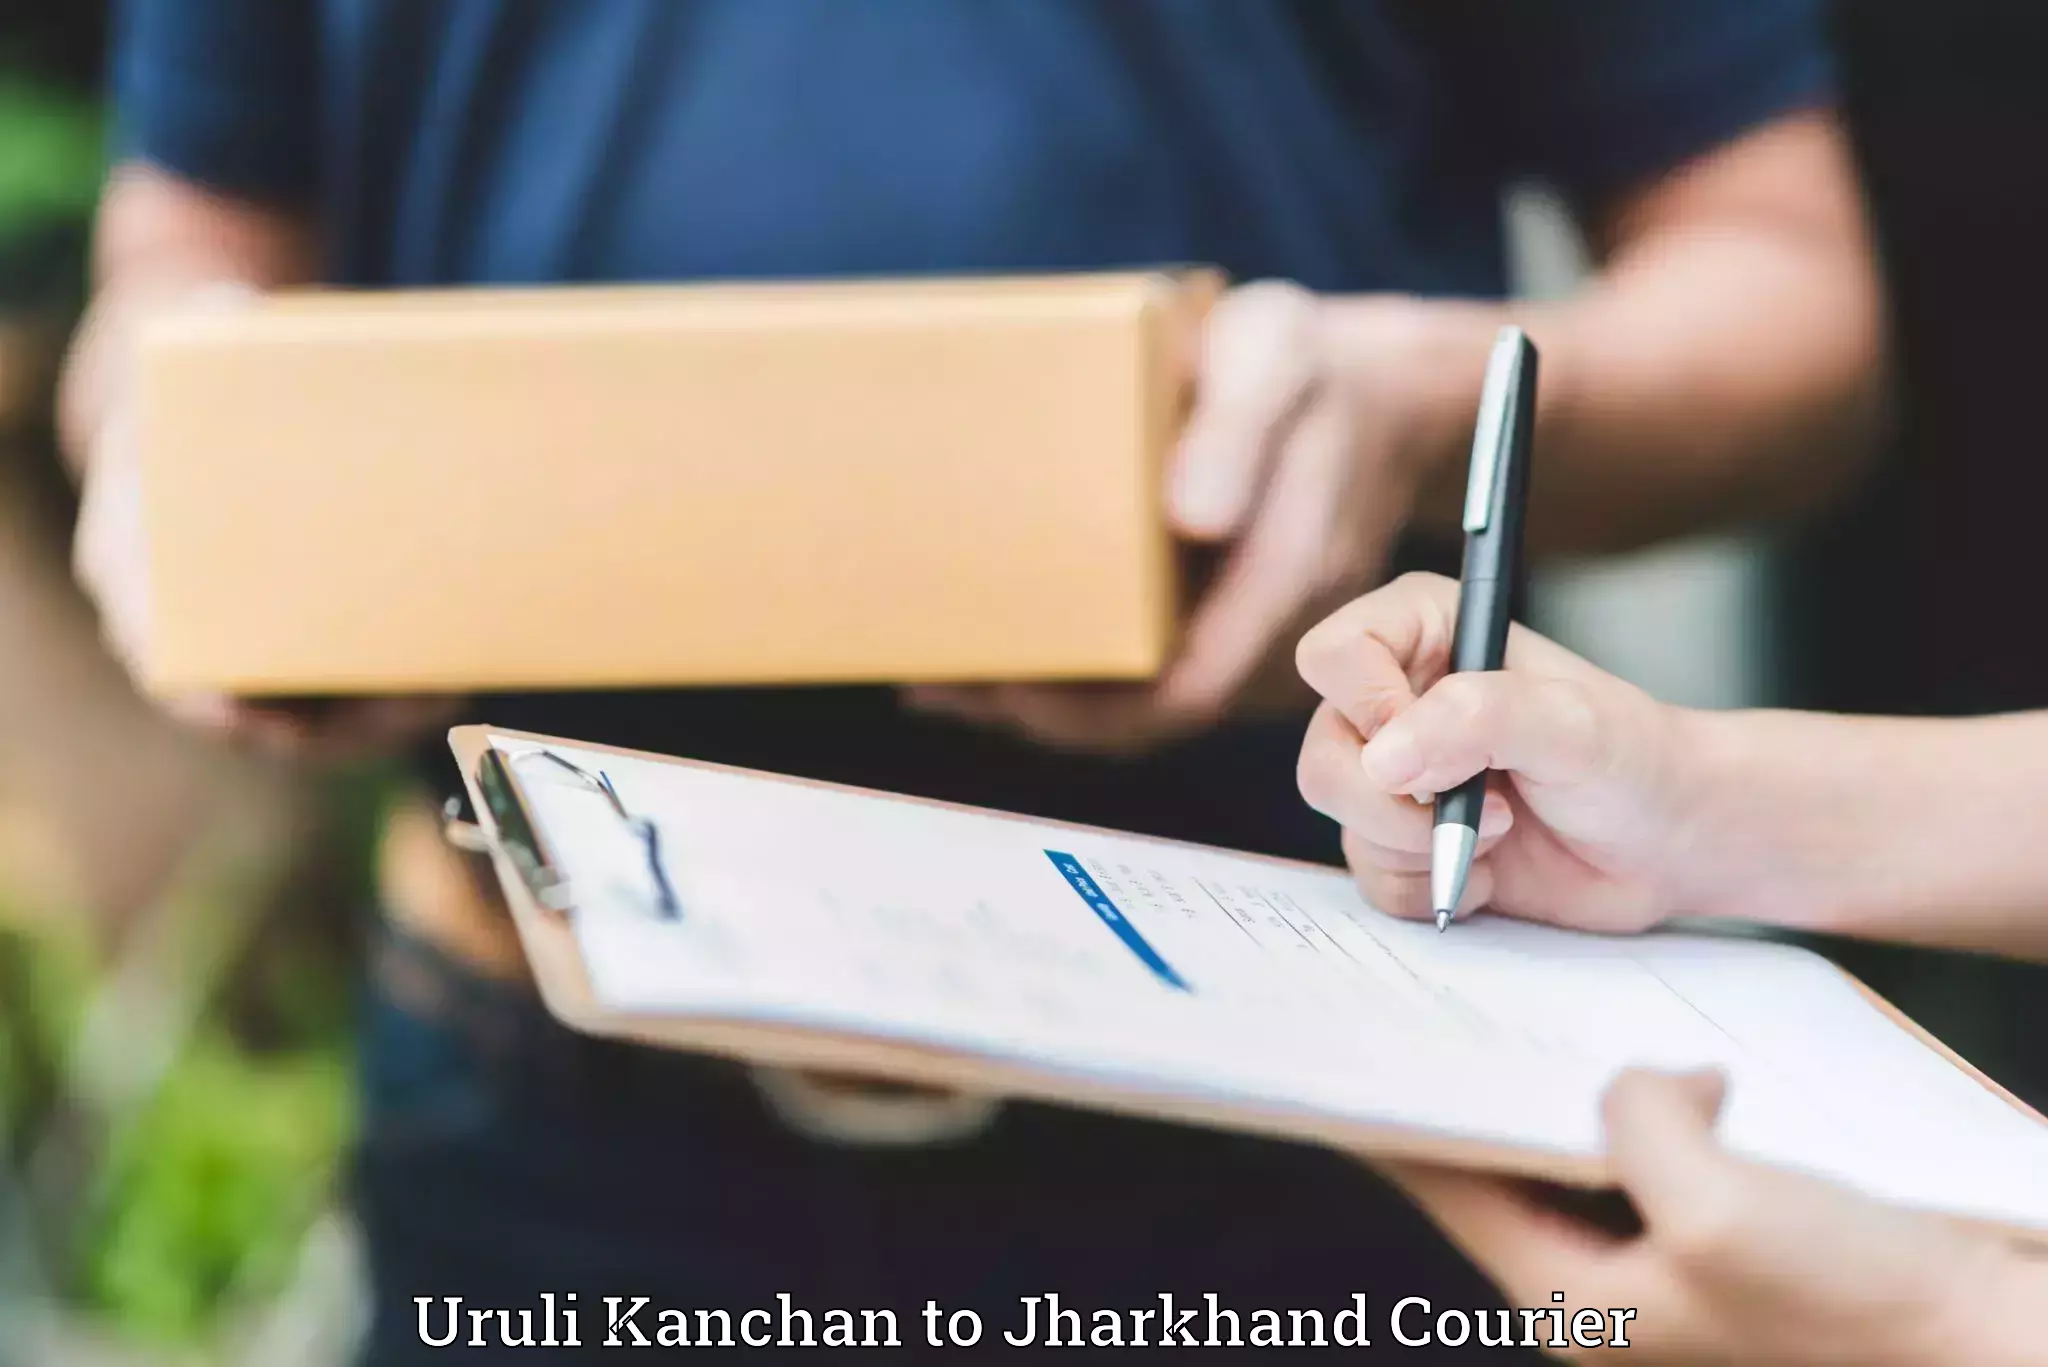 Luggage transport consulting Uruli Kanchan to Jharkhand